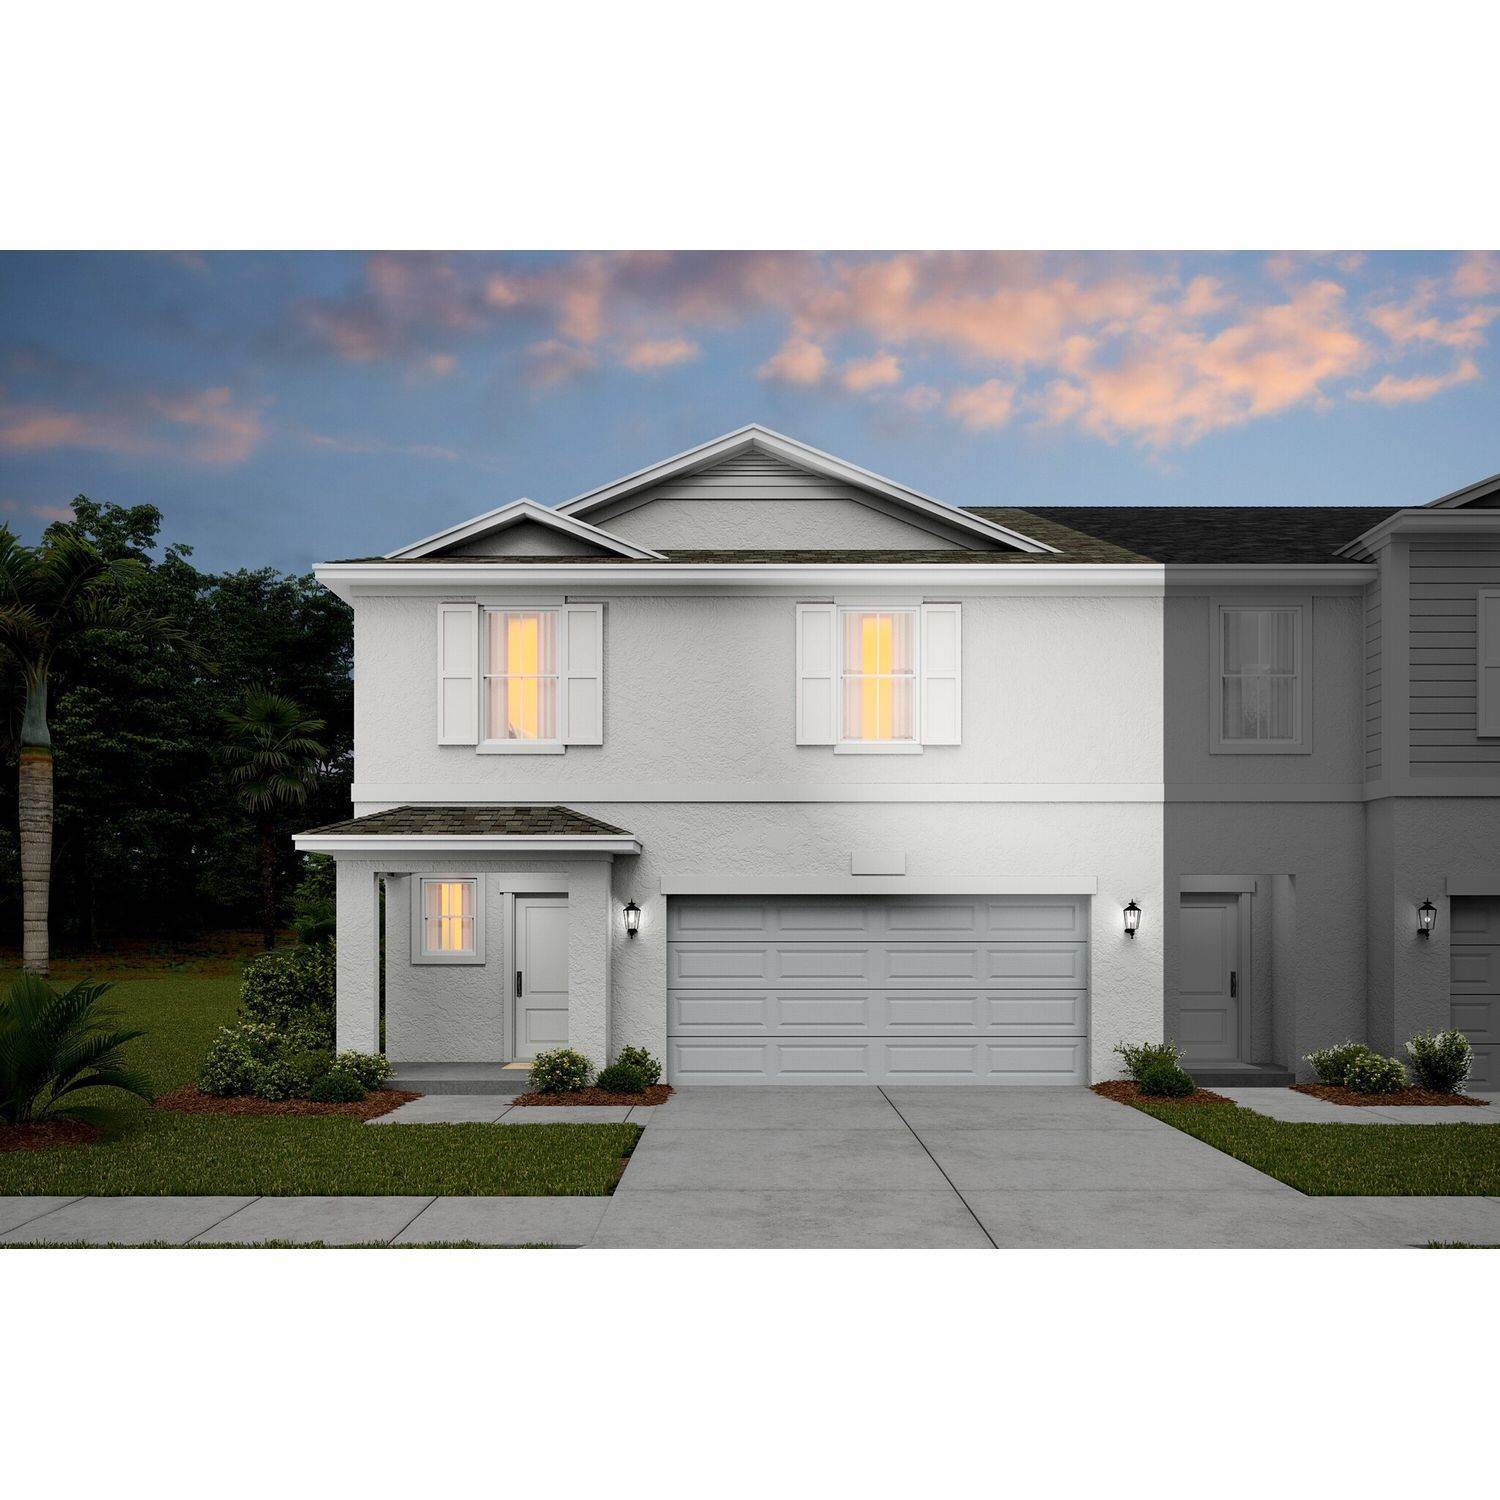 Multi Family for Sale at Port St. Lucie, FL 34983